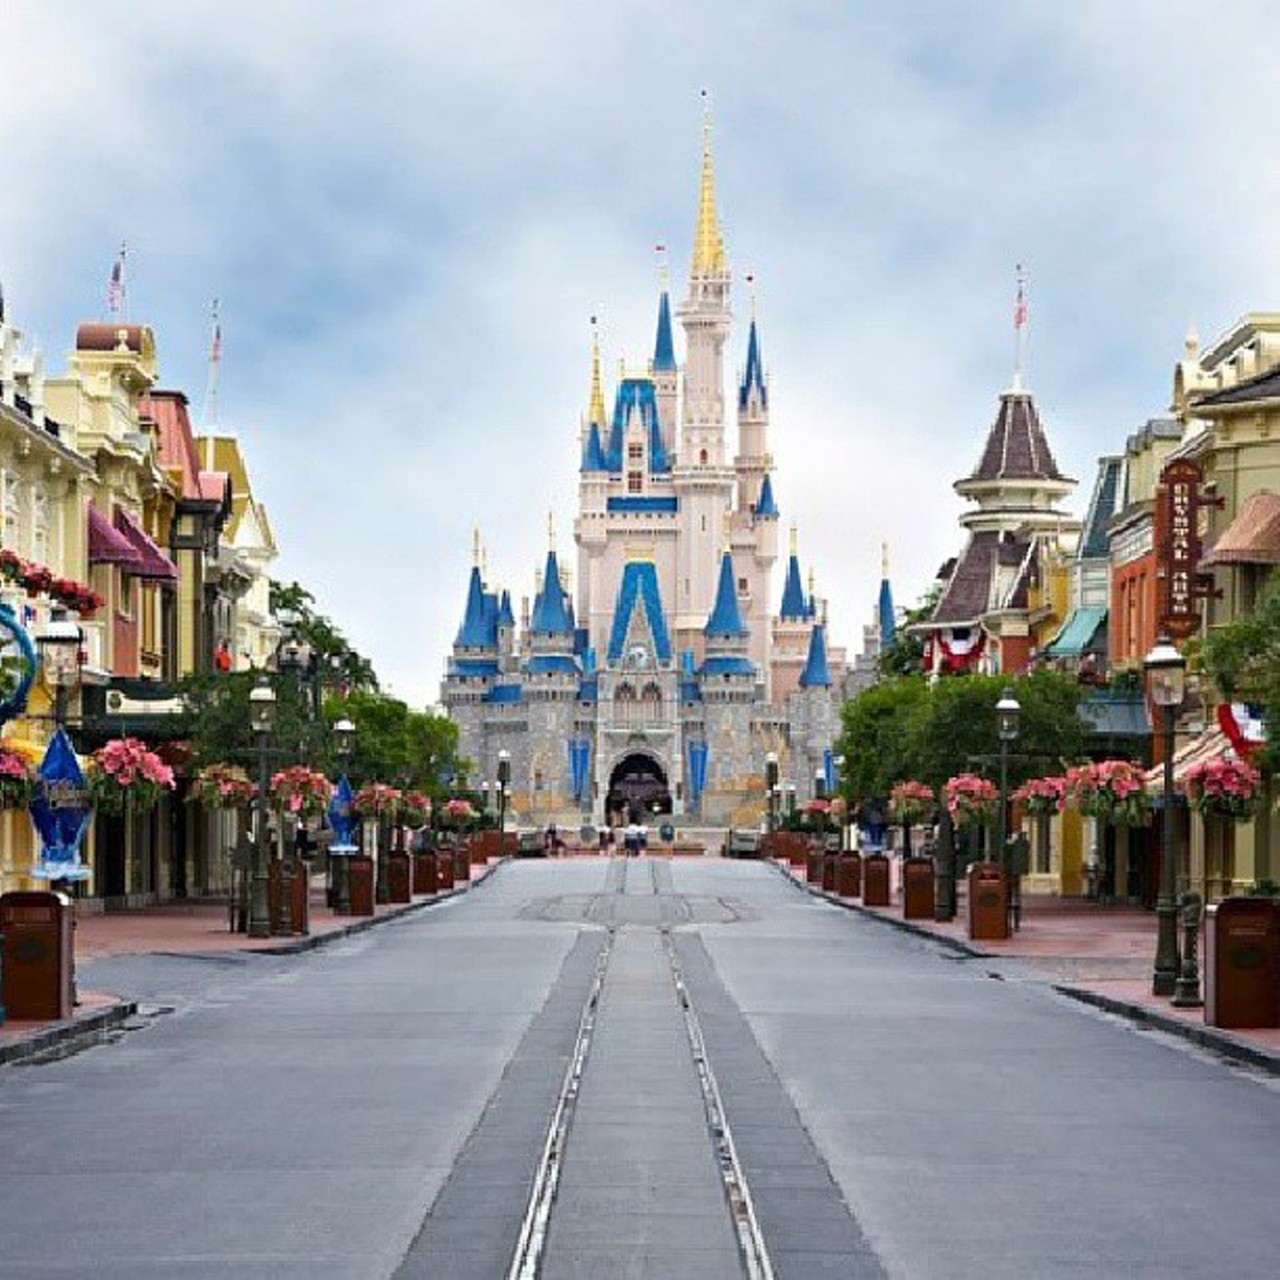 The sidewalks bordering Main Street are red for two reasons: When building the park, Disney wanted to roll out the red carpet for guests; also, Kodak told park designers that red walkways would enhance guests' photos.